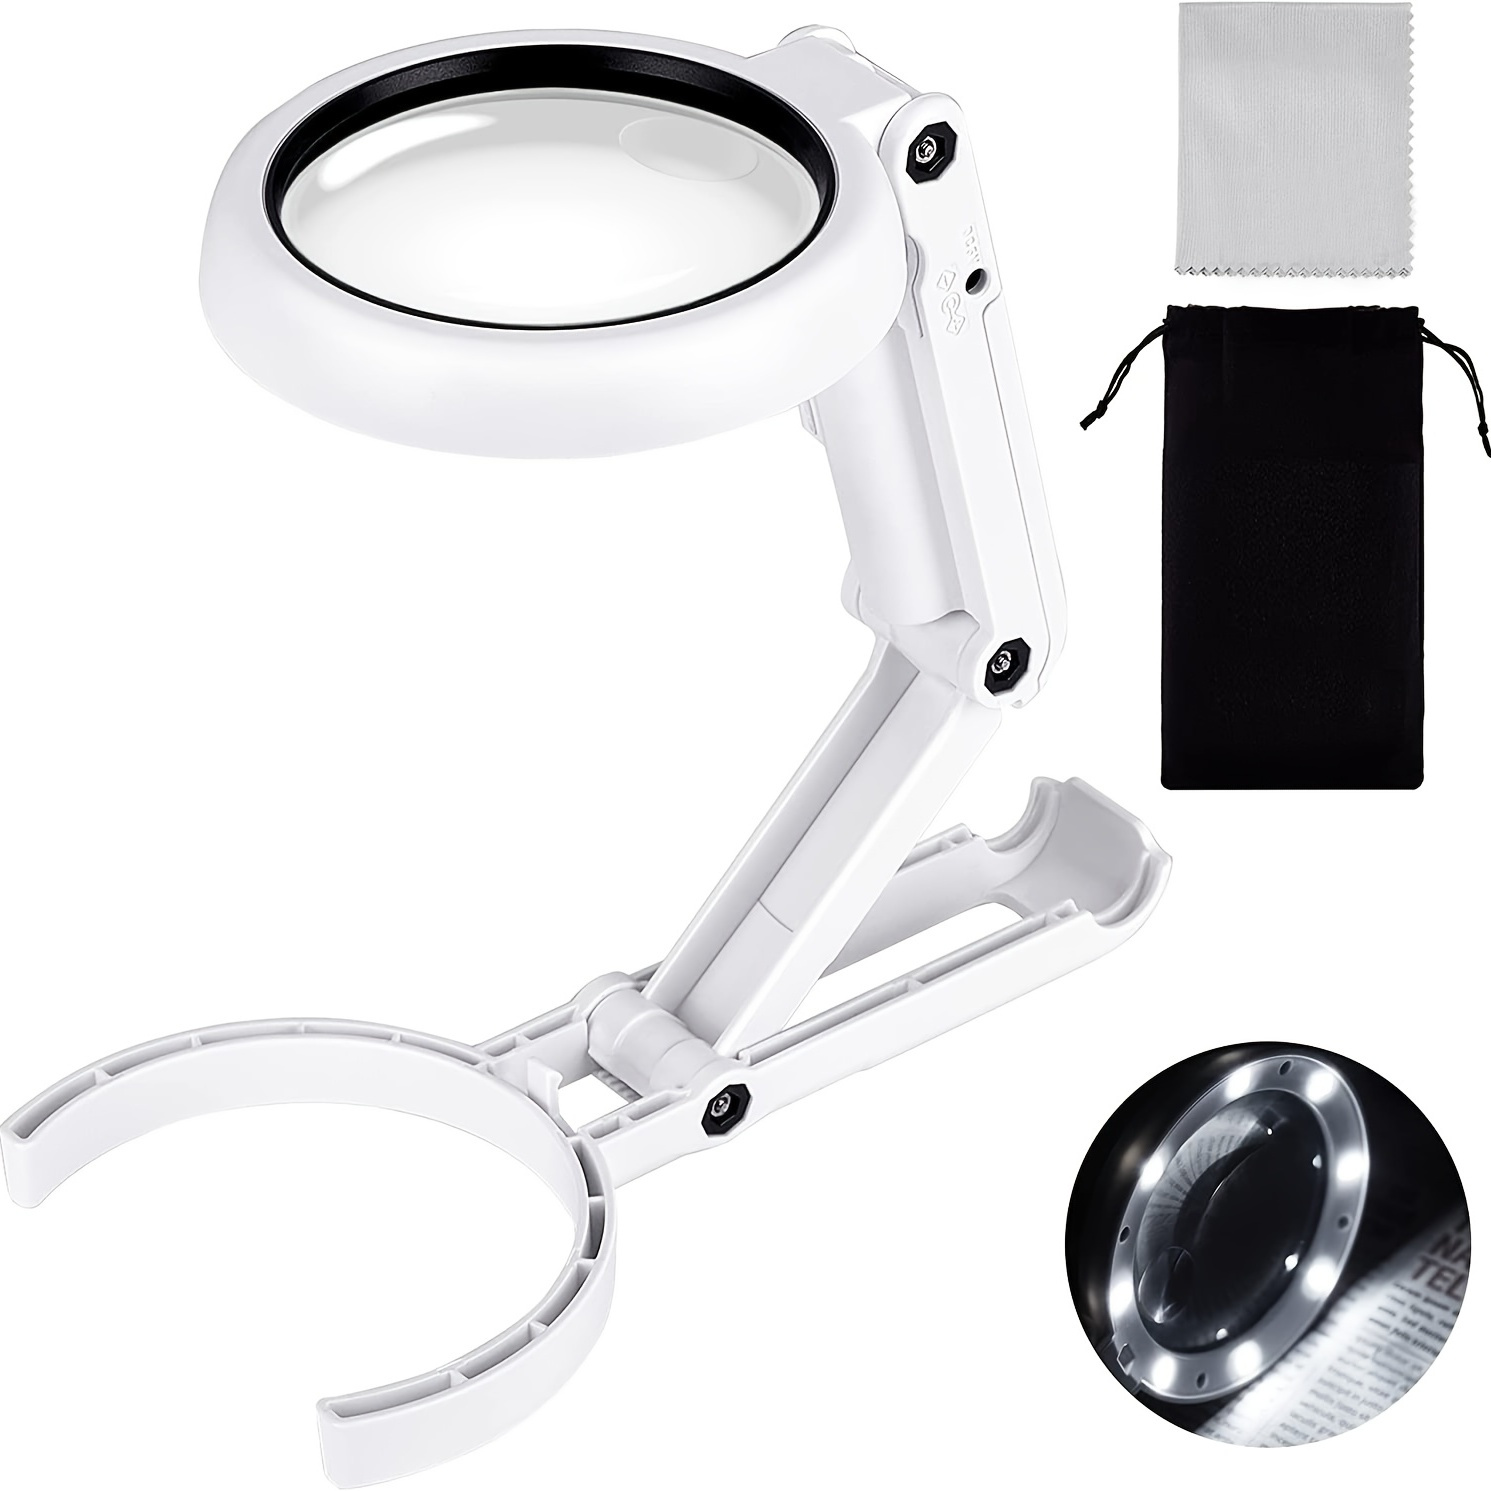 Head Magnifying Glass with Light Rechargeable Headband Magnifier